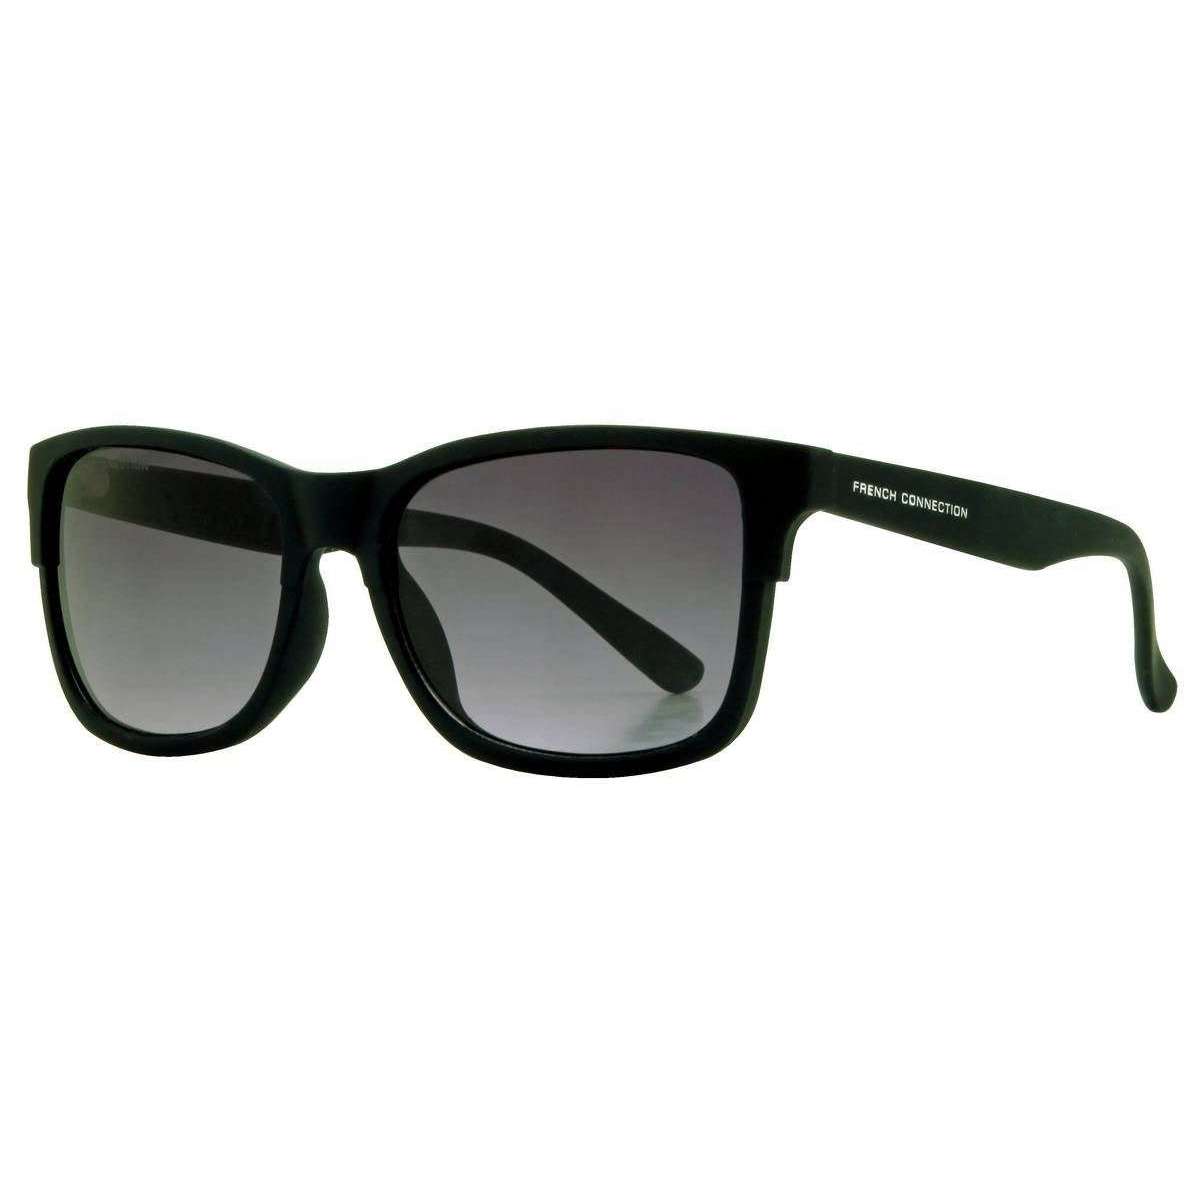 French Connection Rectangle Classic Sunglasses - Dark Navy/Smoke Grey